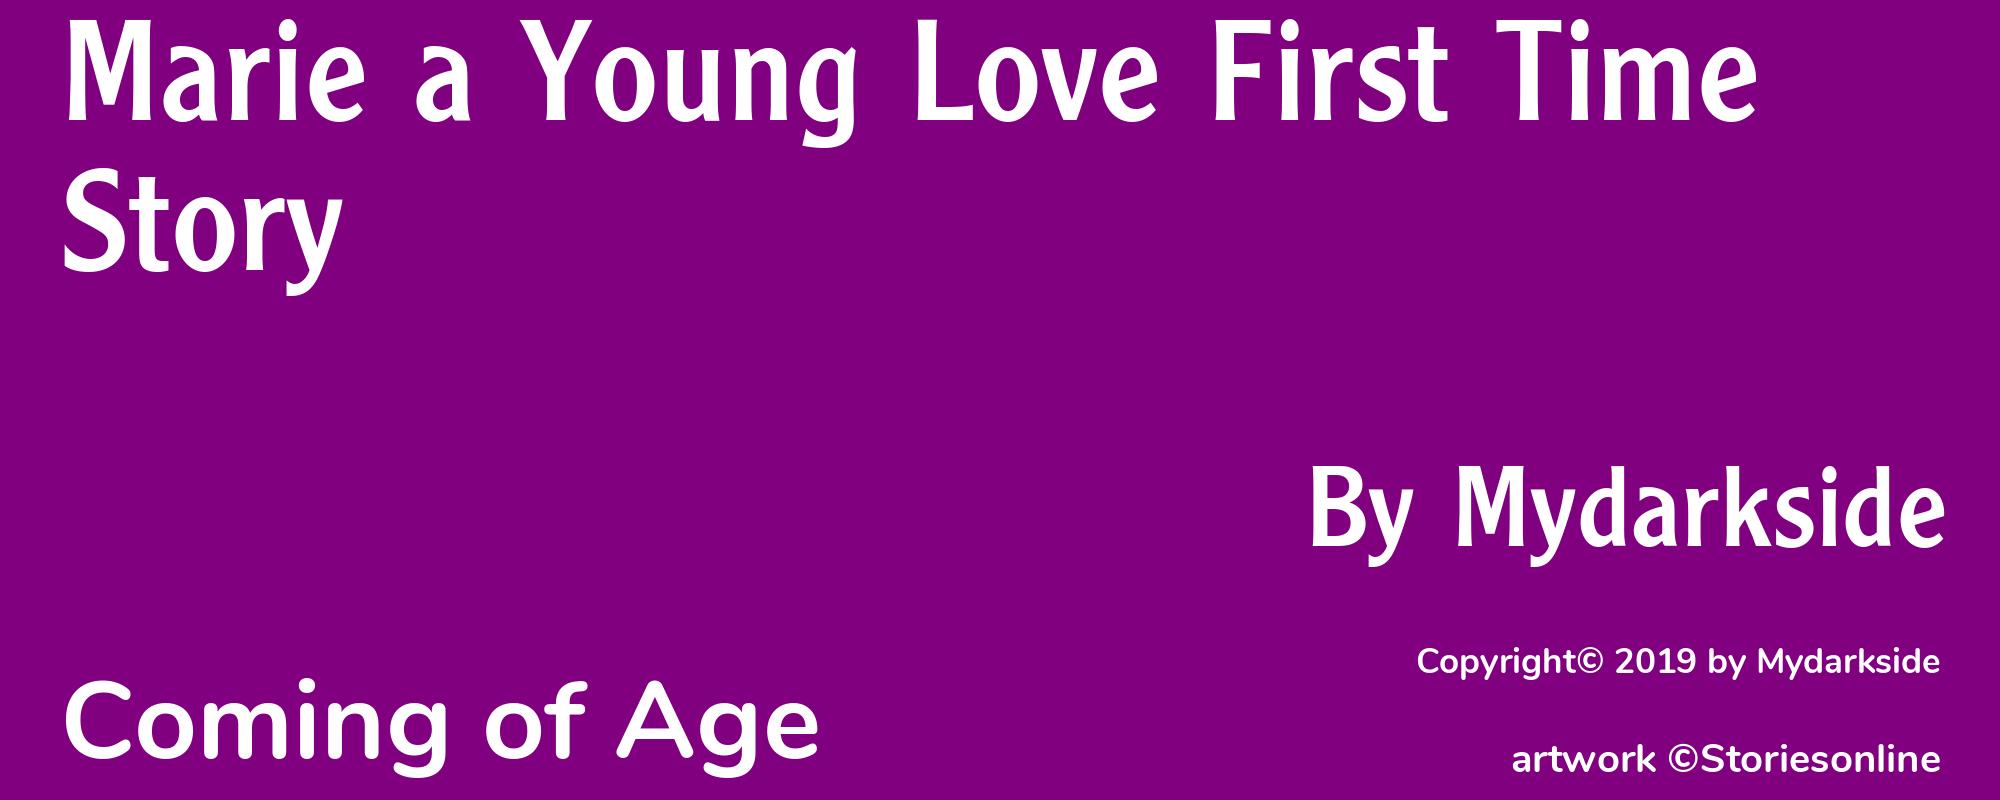 Marie a Young Love First Time Story - Cover